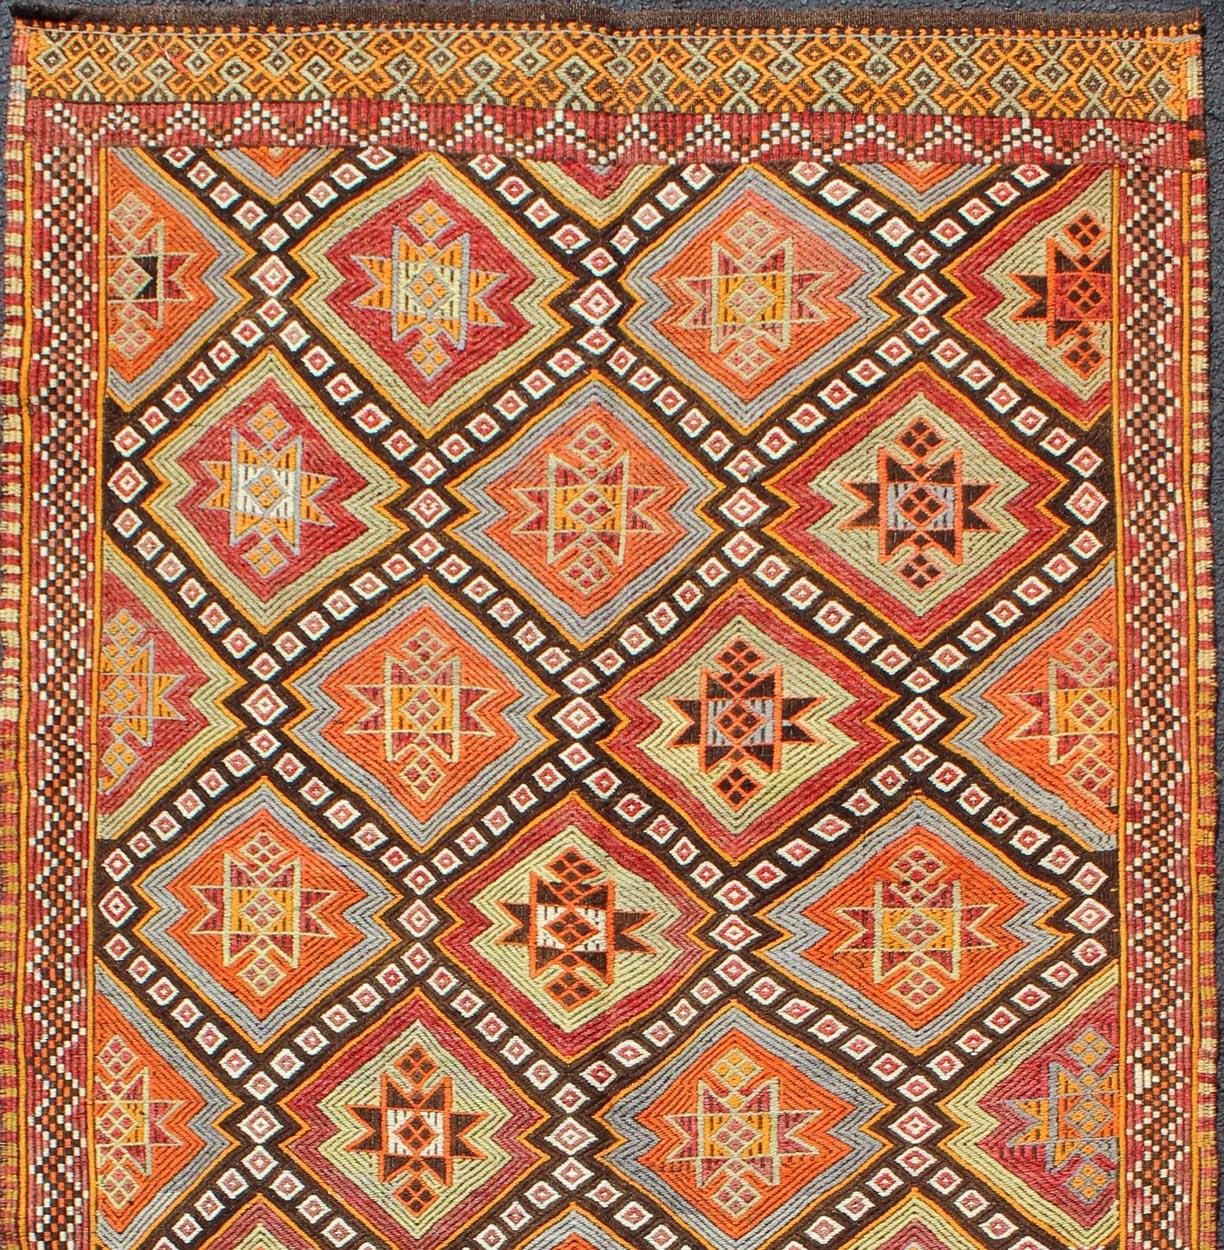 Colorful Vintage Turkish Embroidered Flat-Weave Kilim Rug for Modern Interiors In Excellent Condition For Sale In Atlanta, GA